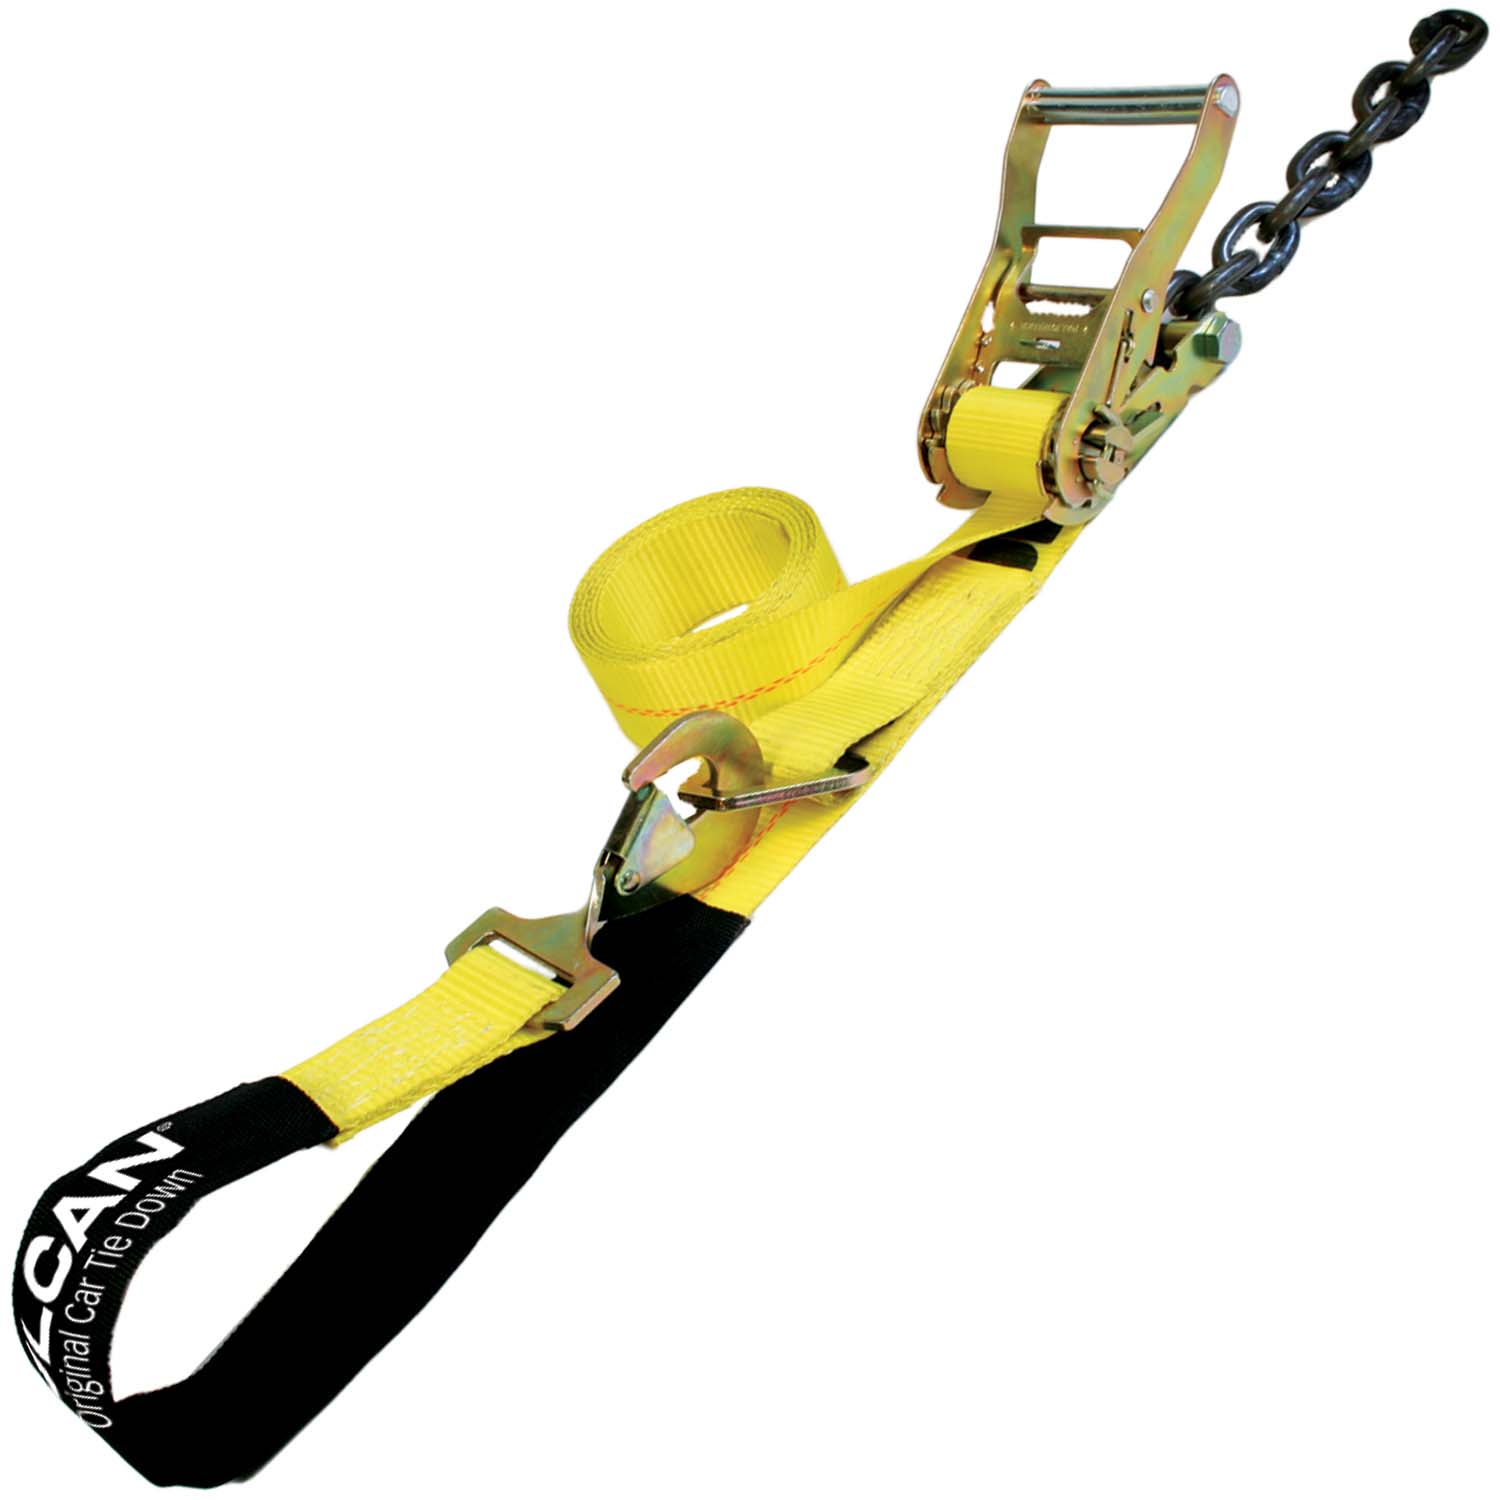 Vulcan Classic Tow Truck Axle Strap With Chain Tails